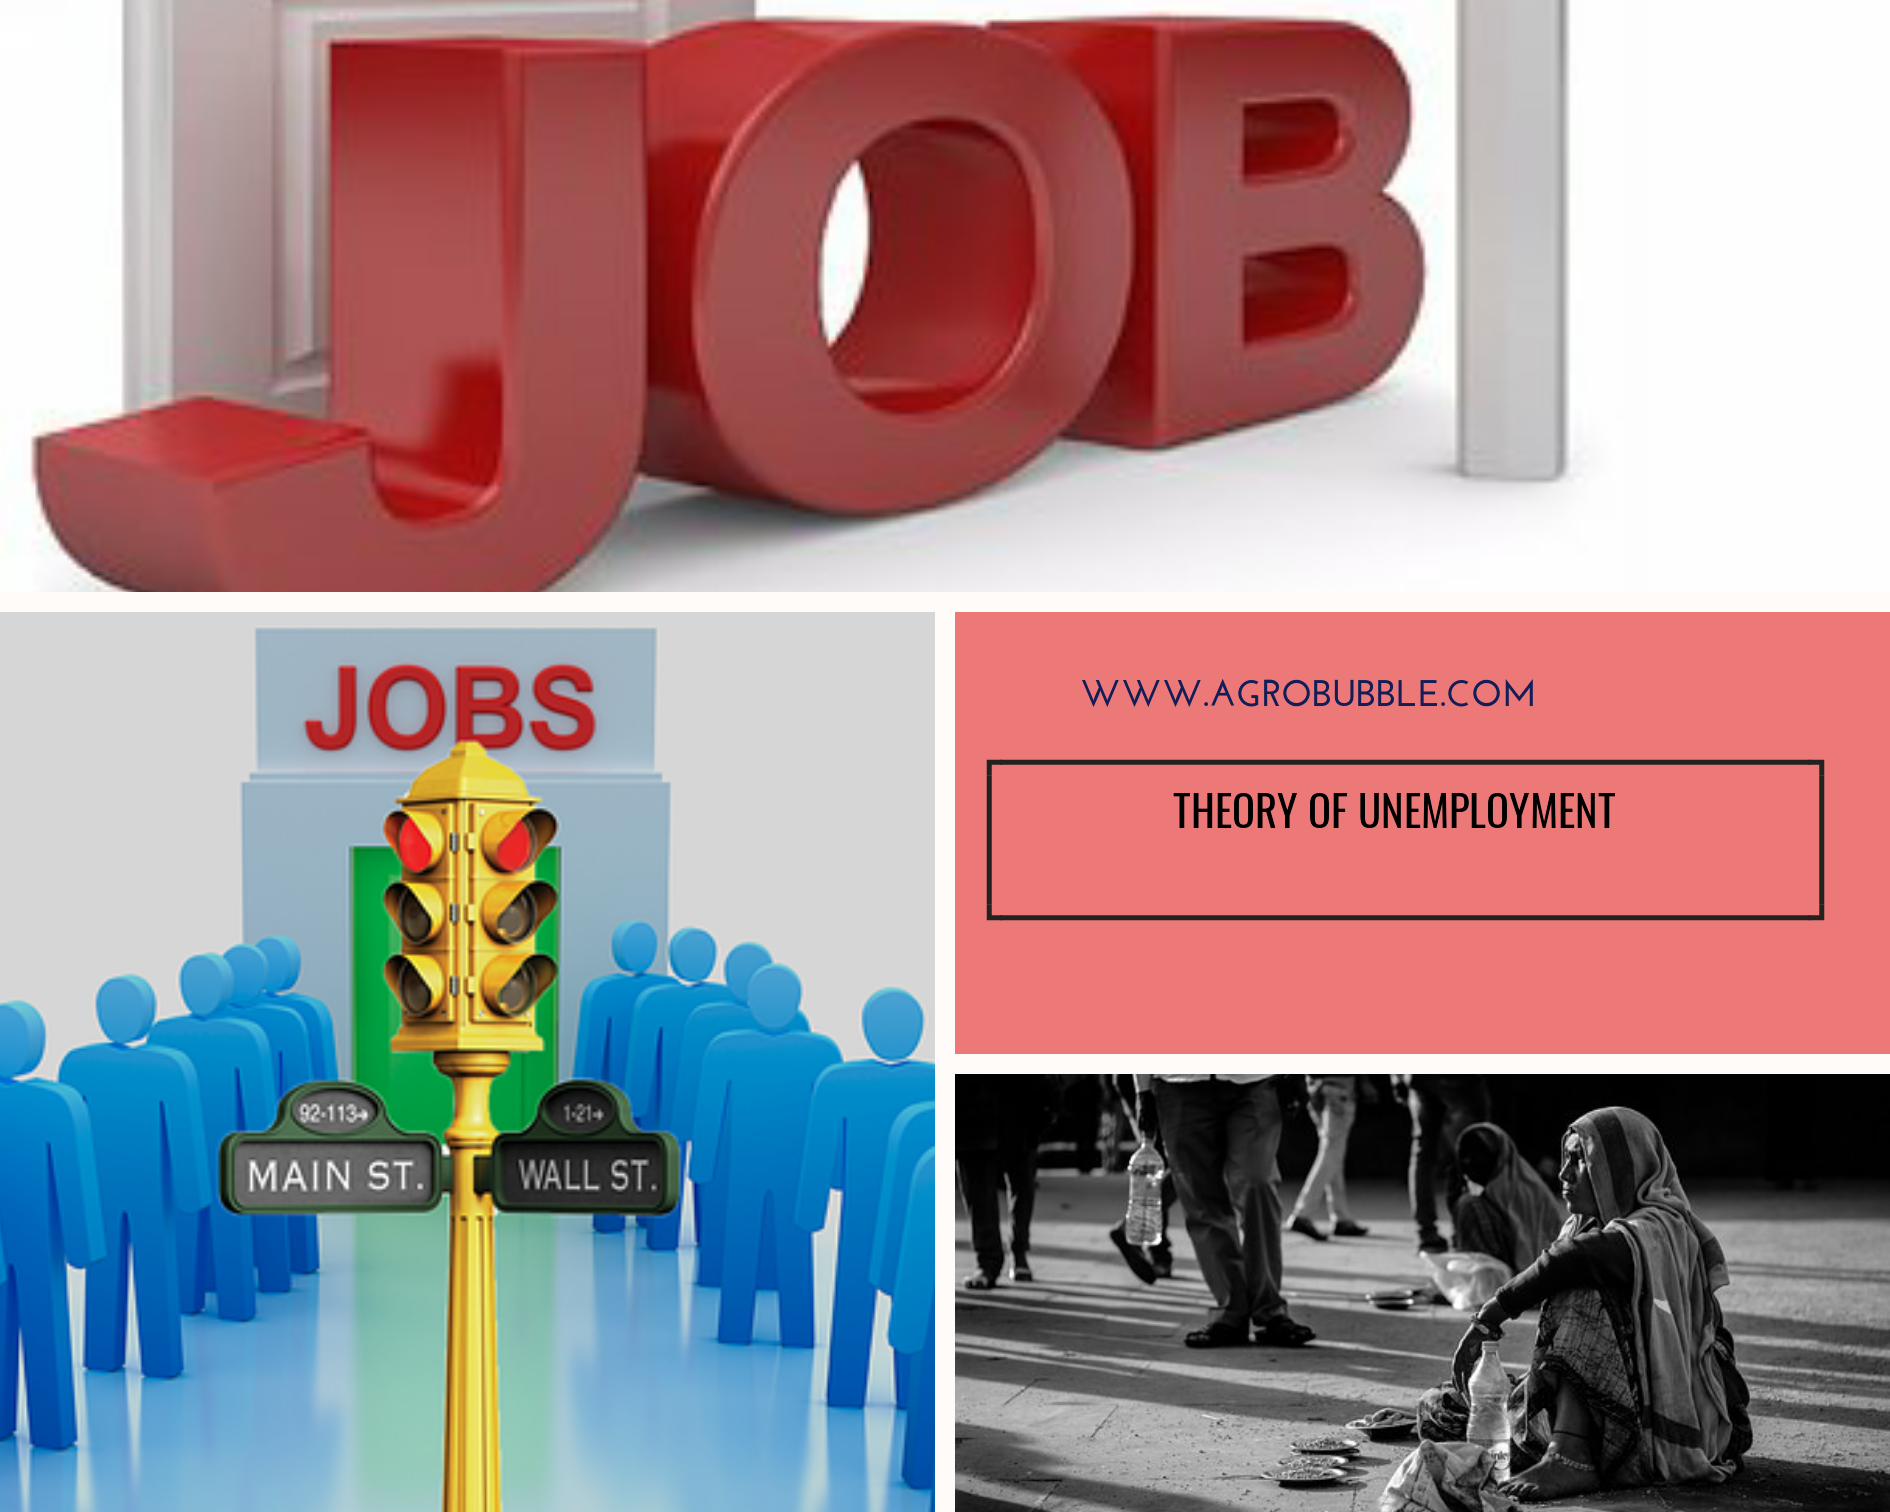 Theory of unemployment